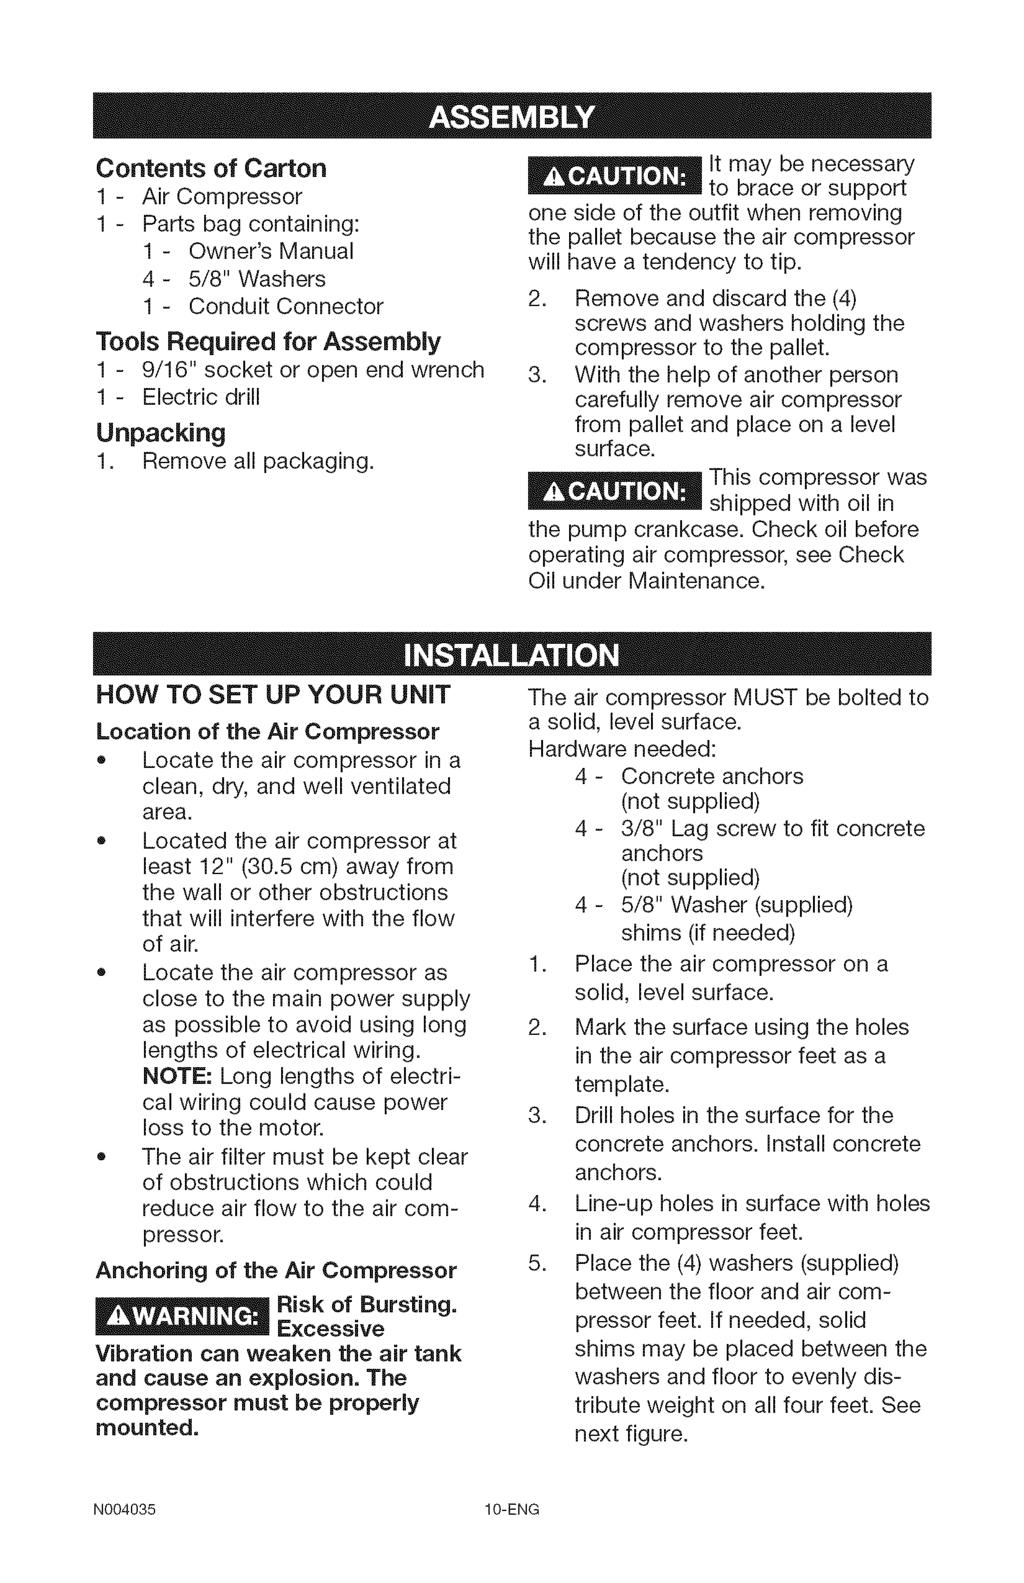 Contents of Carton 1 - Air Compressor 1 - Parts bag containing: 1 - Owner's Manual 4-5/8" Washers 1 - Conduit Connector Tools Required for Assembly 1-9/16" socket or open end wrench 1 - Electric